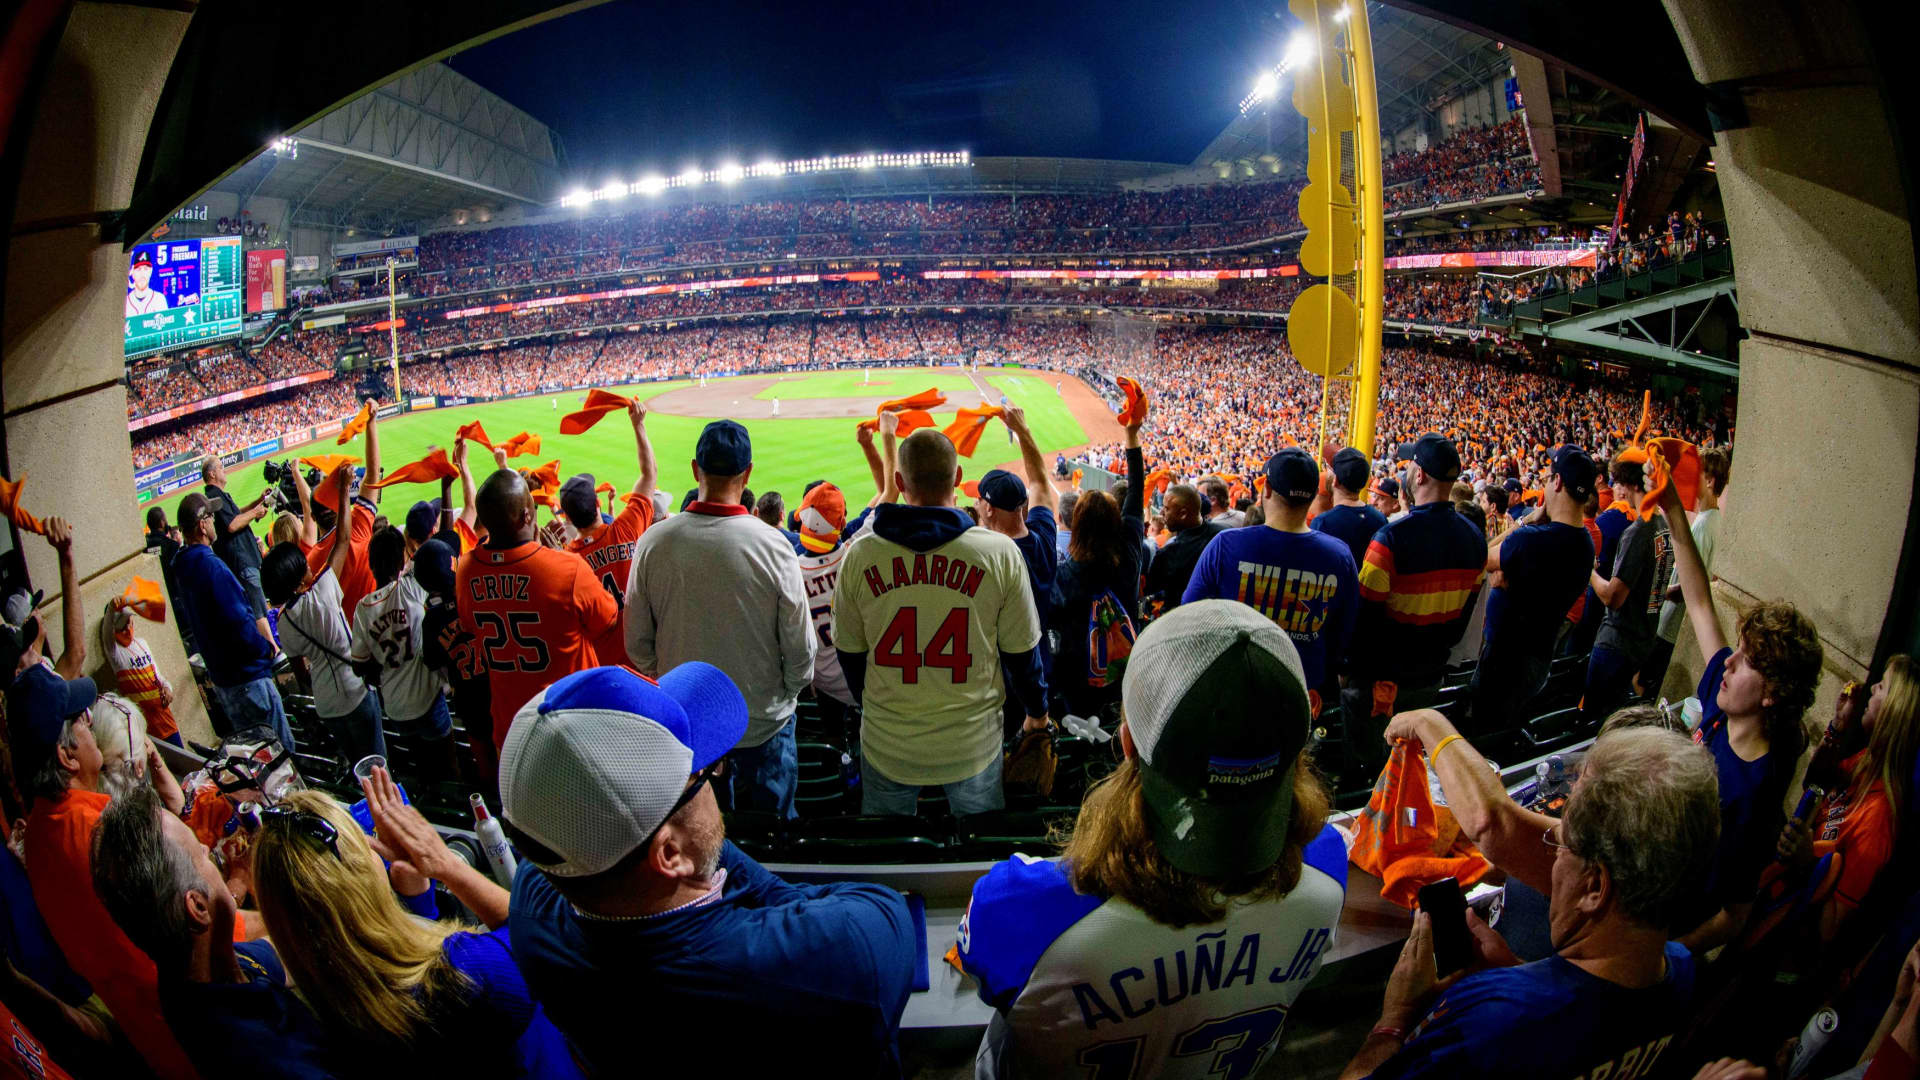 A view of the fans watching from the outfield during the game between the Houston Astros and the Atlanta Braves during the first inning of game six of the 2021 World Series at Minute Maid Park.